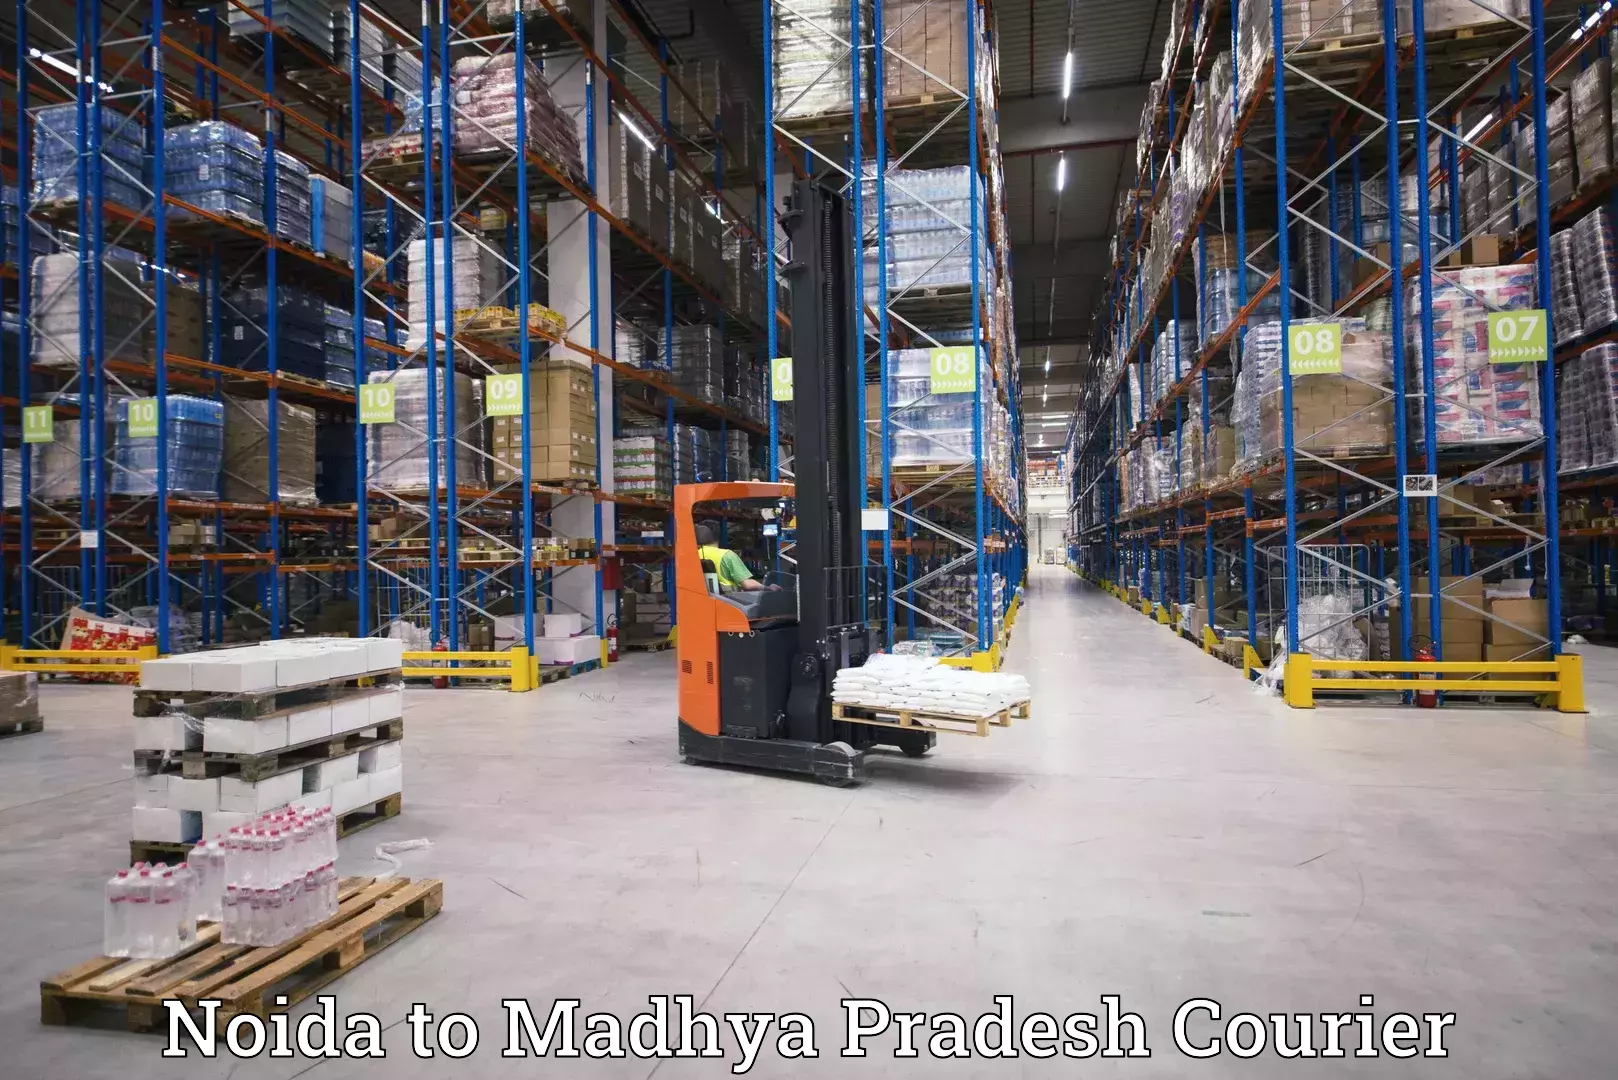 Express logistics providers in Noida to Burhar